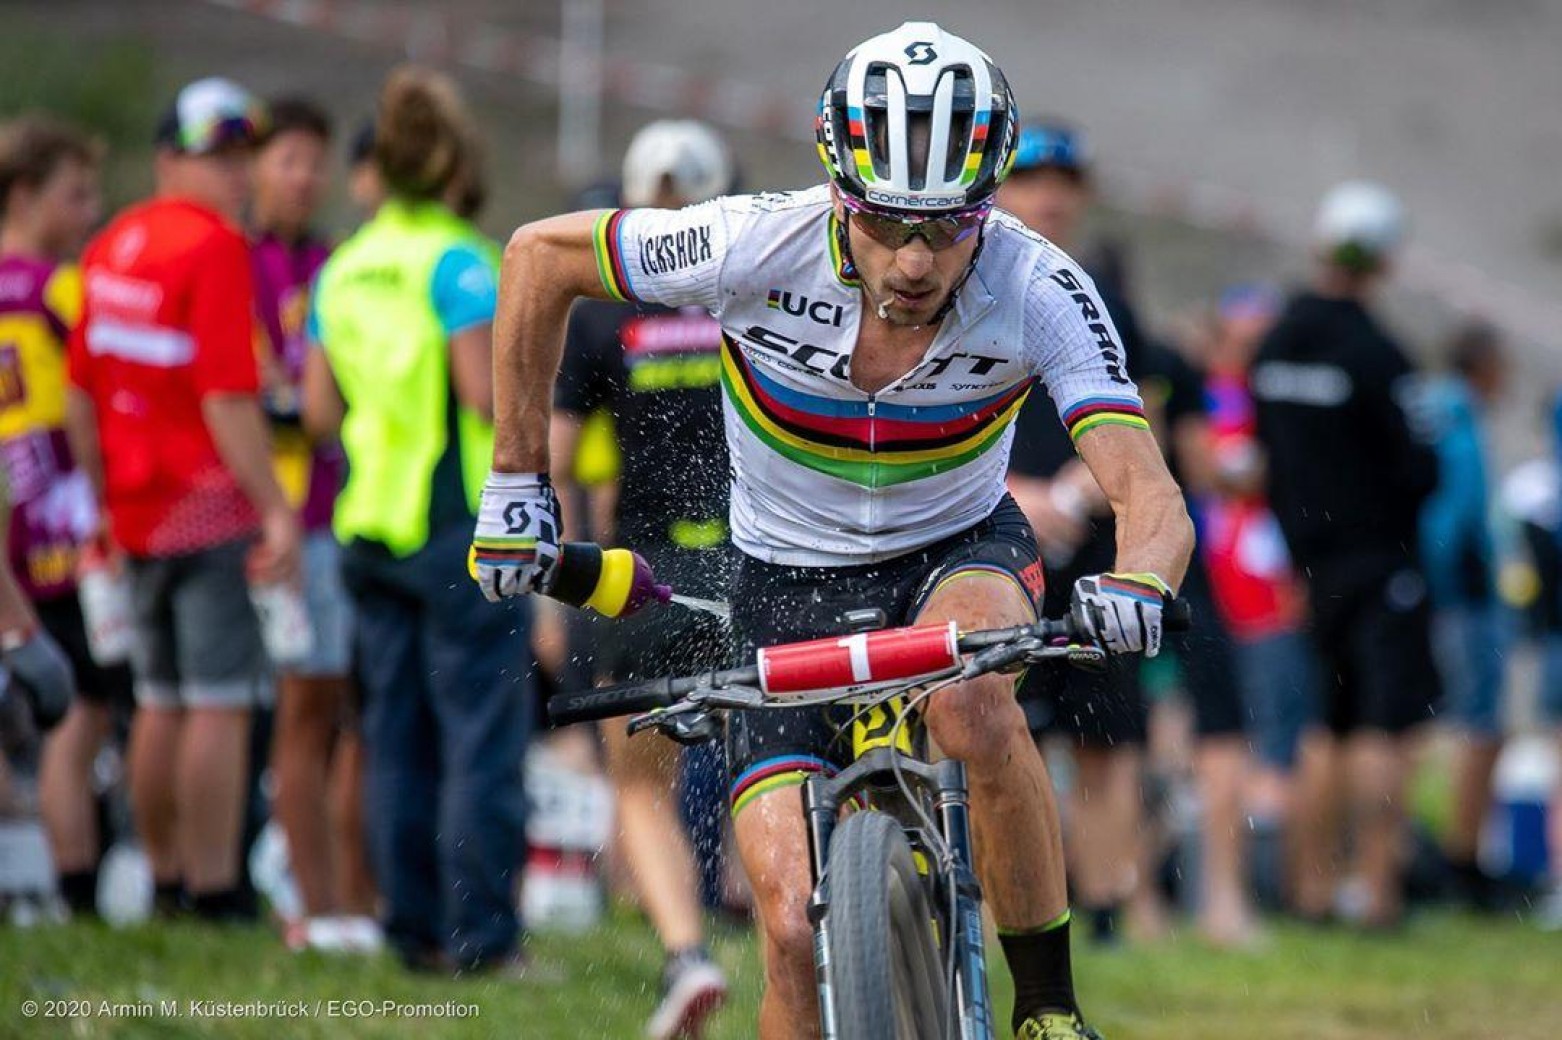 Nino Schurter and Sina Frei win the first race of the year